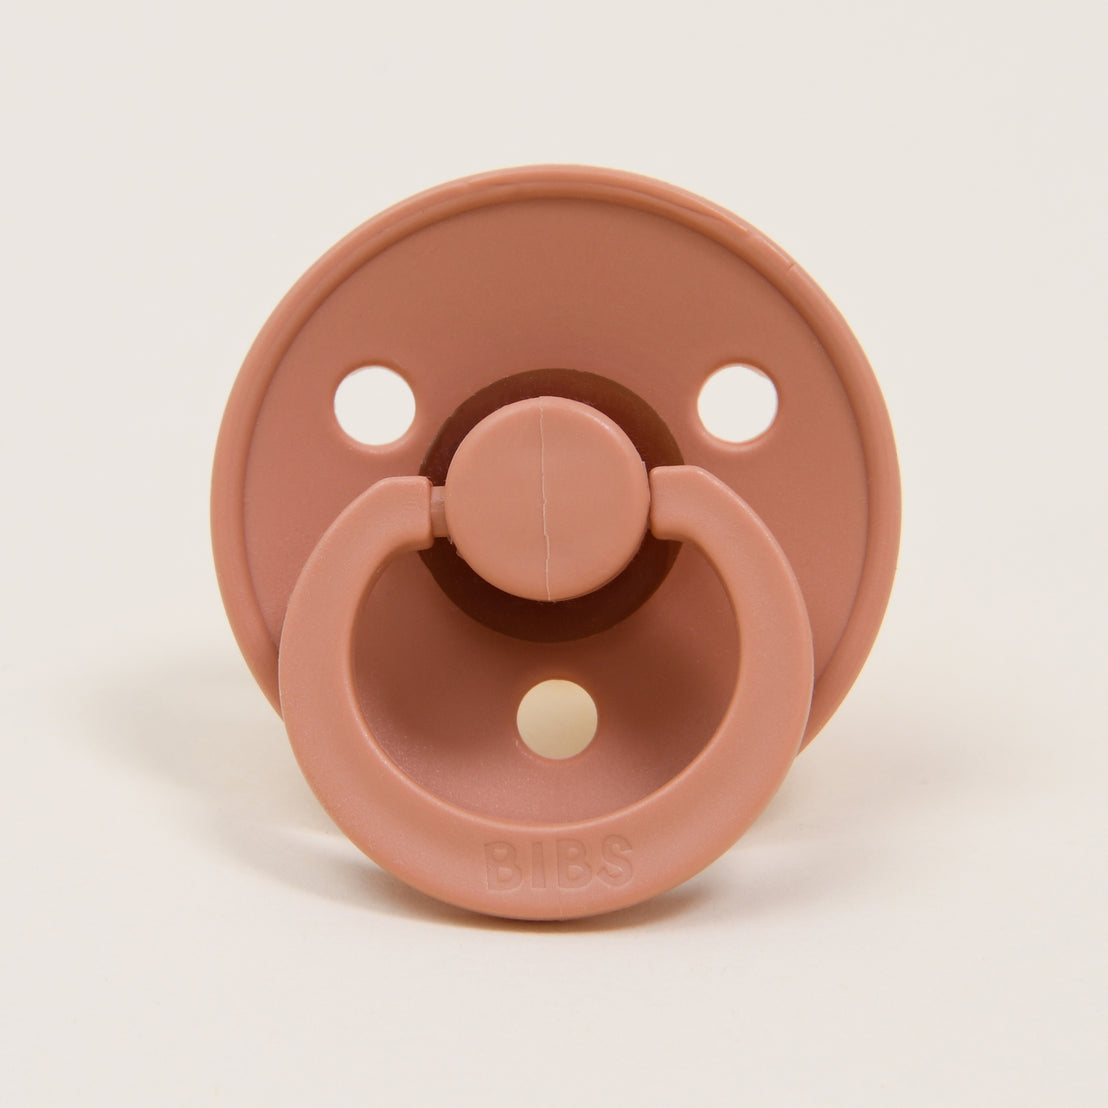 A close-up image of a Bibs pacifier set in Peach Sunsest & Woodchuck, displayed against a plain white background and ideal as an upscale baby gift.